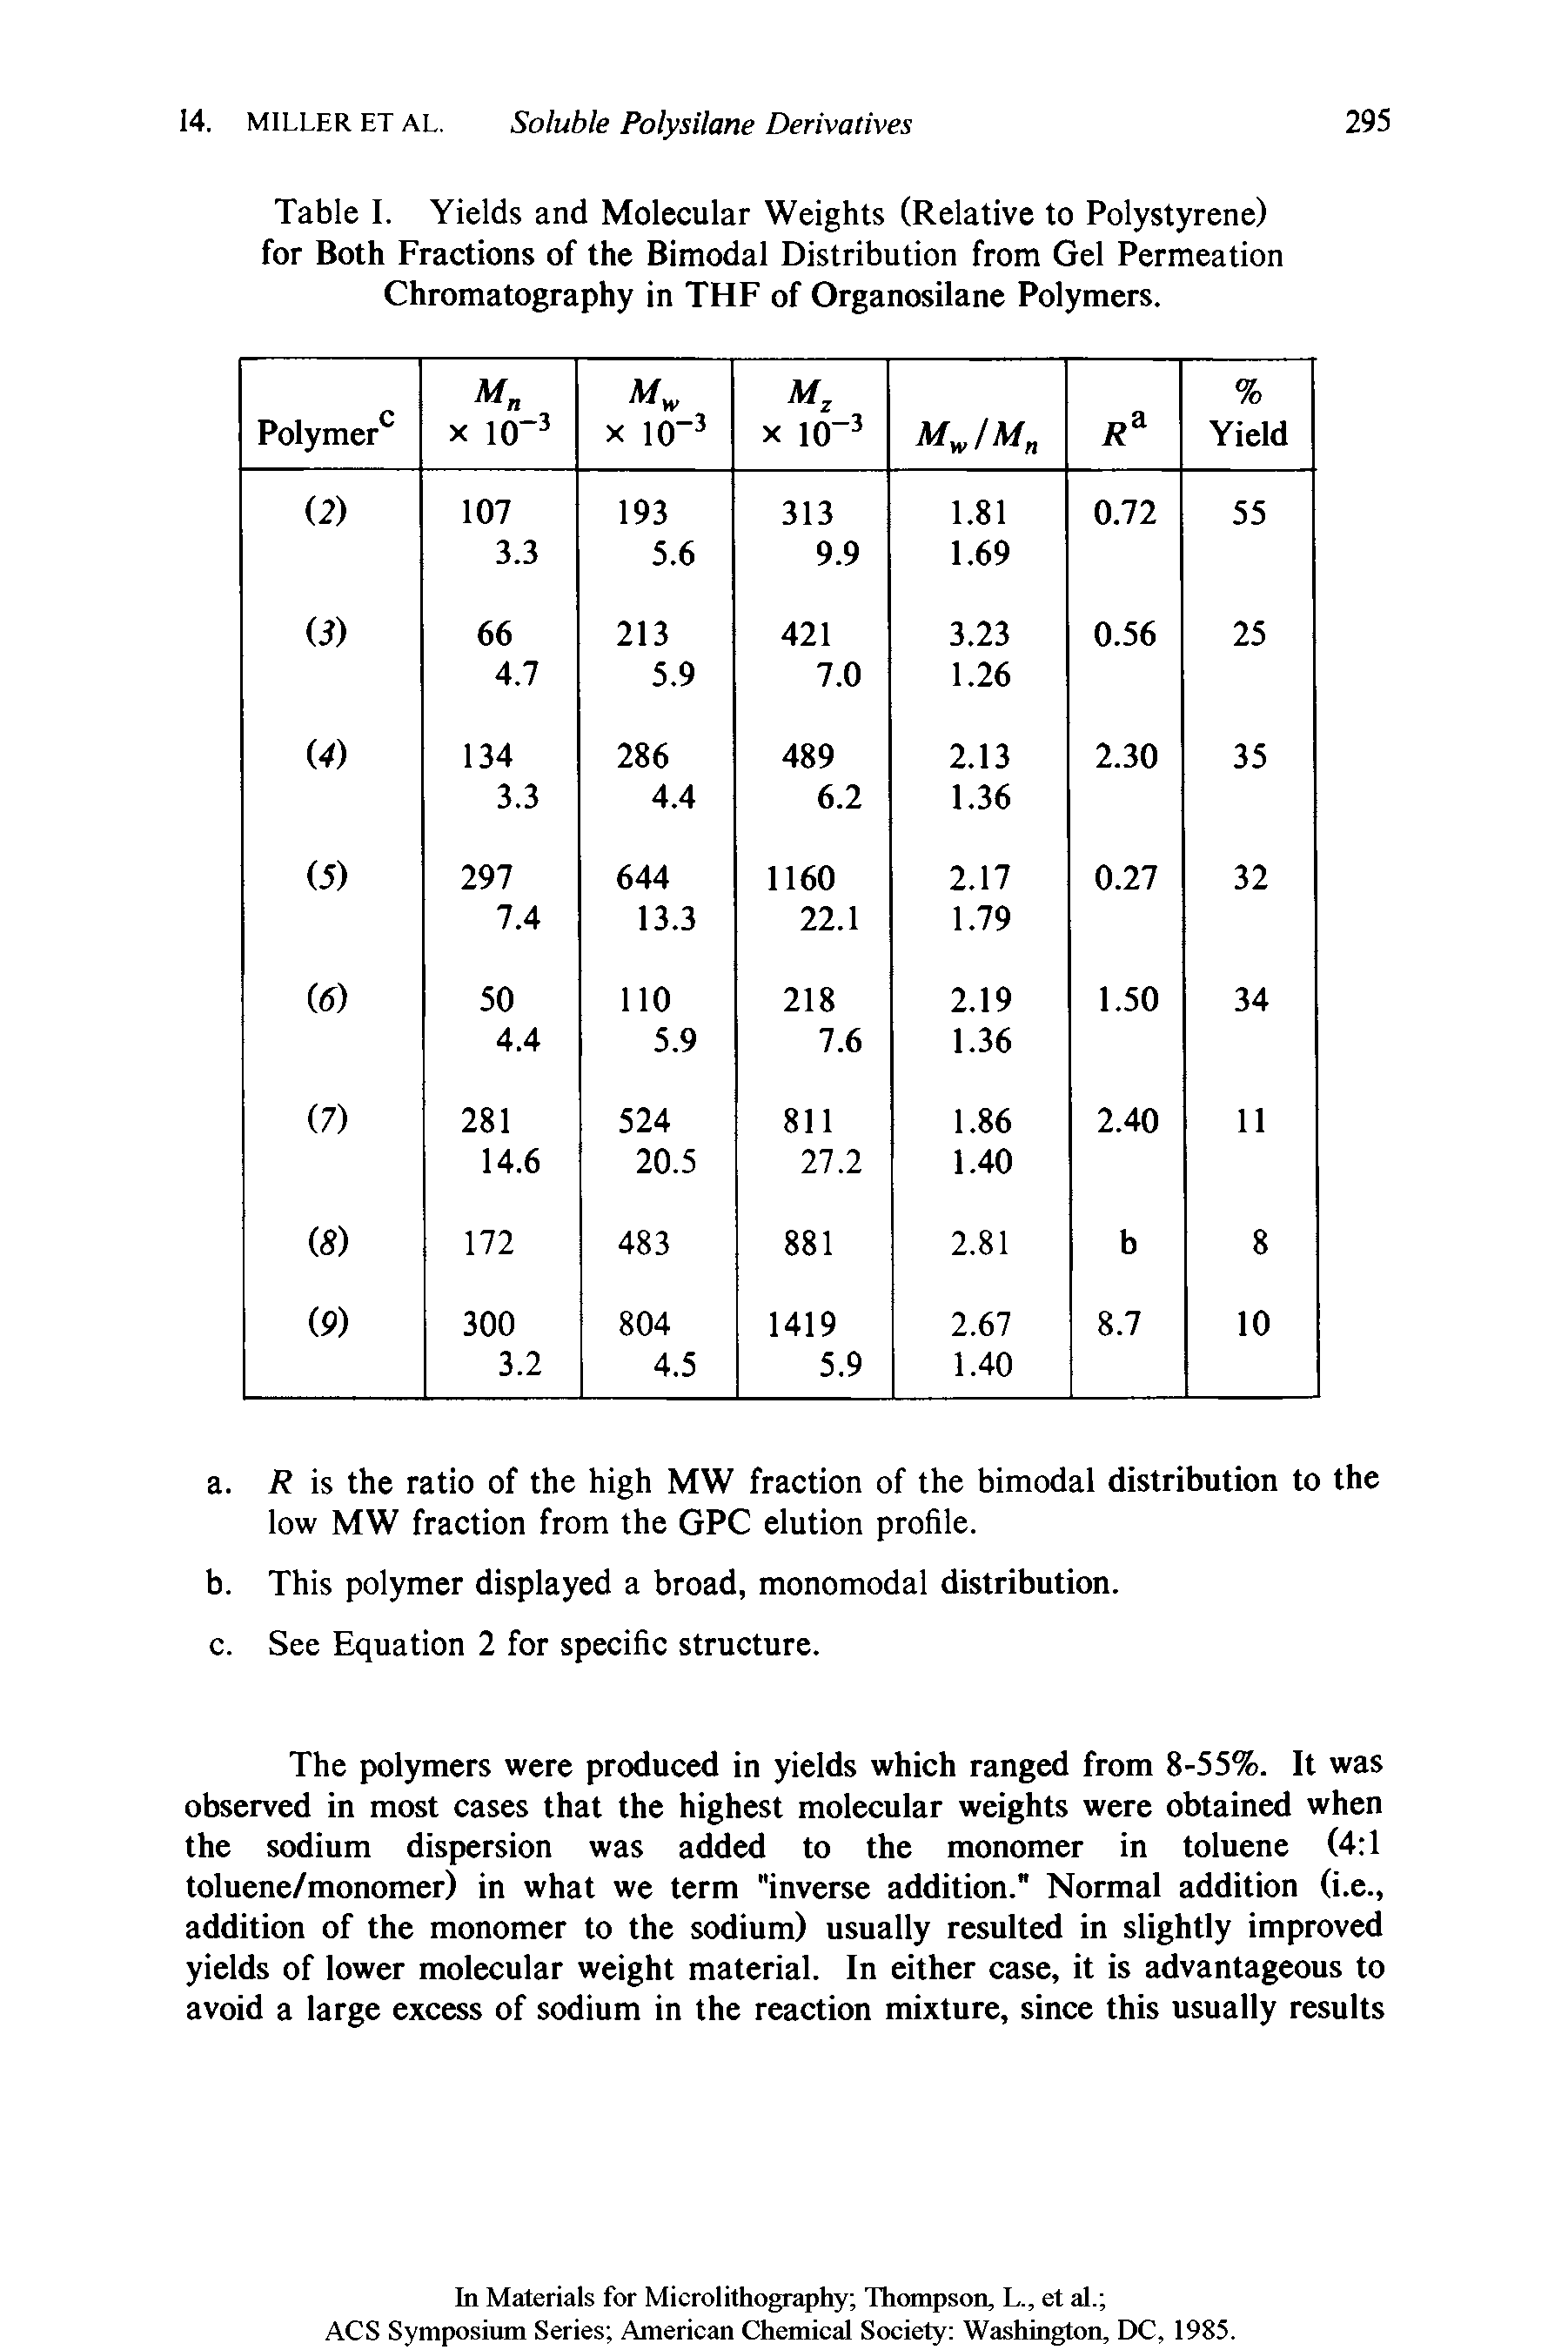 Table I. Yields and Molecular Weights (Relative to Polystyrene) for Both Fractions of the Bimodal Distribution from Gel Permeation Chromatography in THF of Organosilane Polymers.